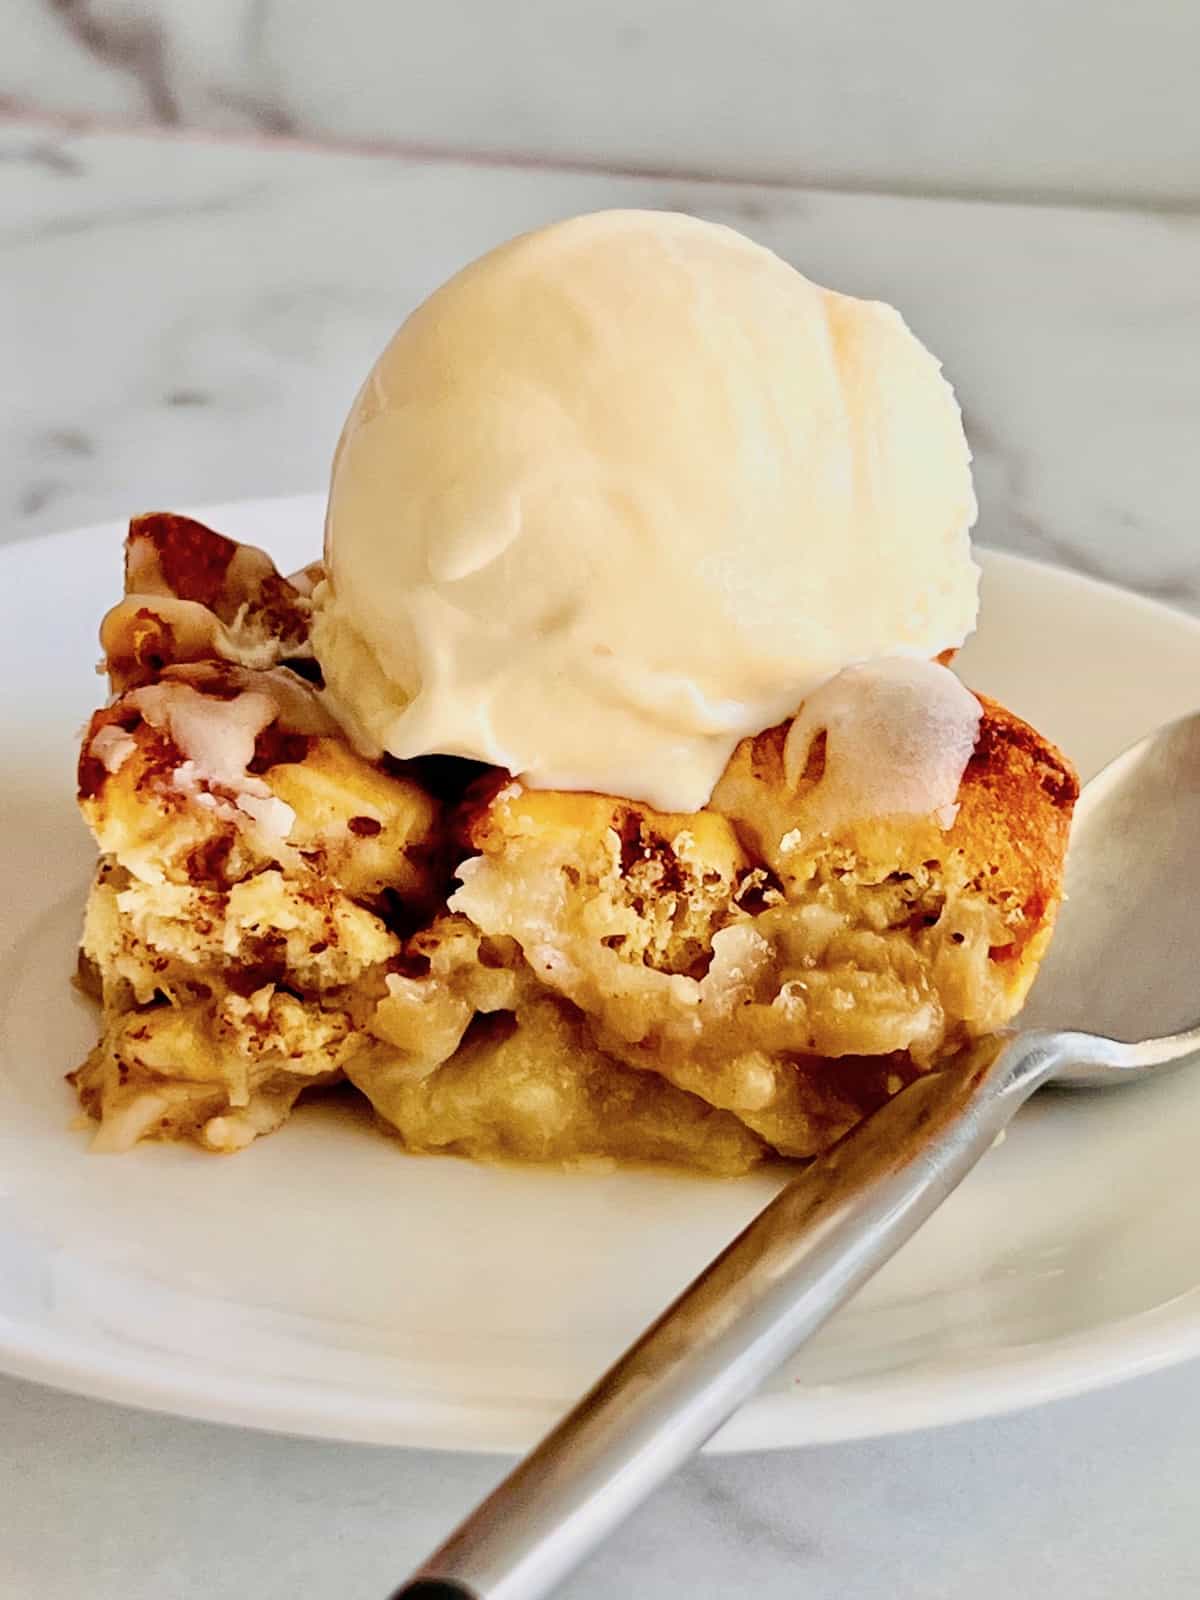 Cinnamon Roll Peach Cobbler plated with an Ice Cream Scoop on top of a slice.